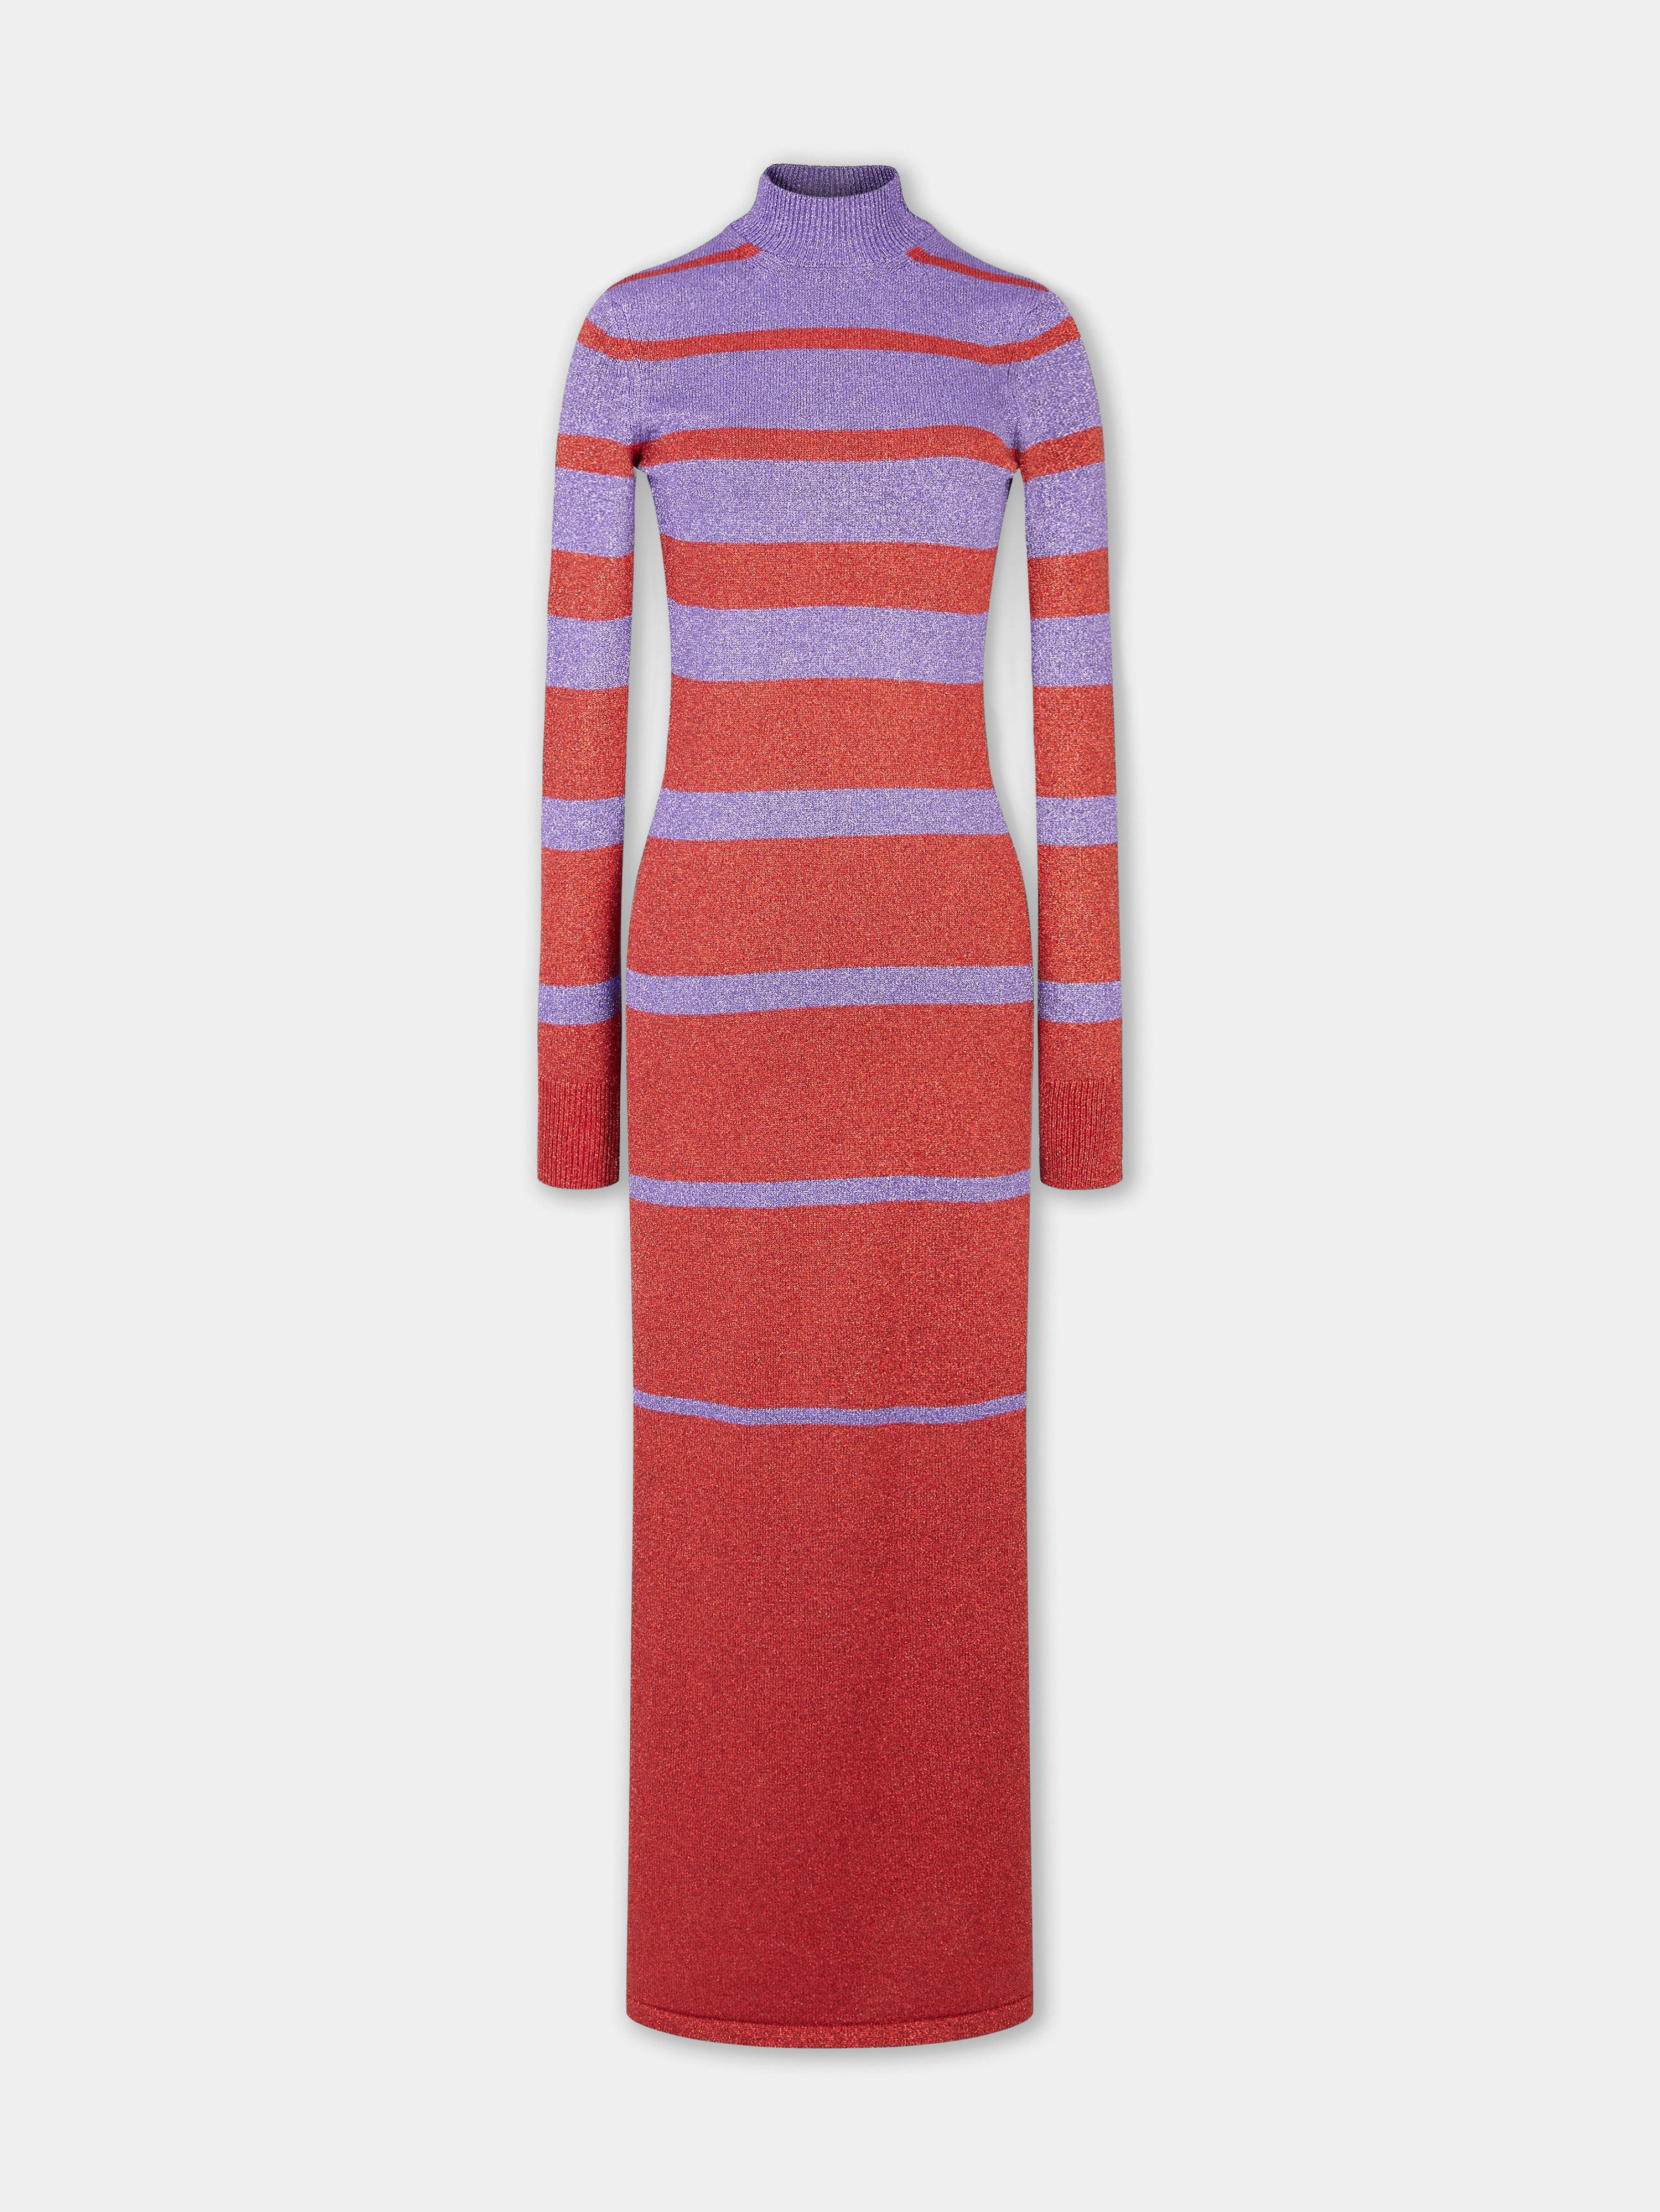 RED AND VIOLET LONG-SLEEVED DRESS - 1